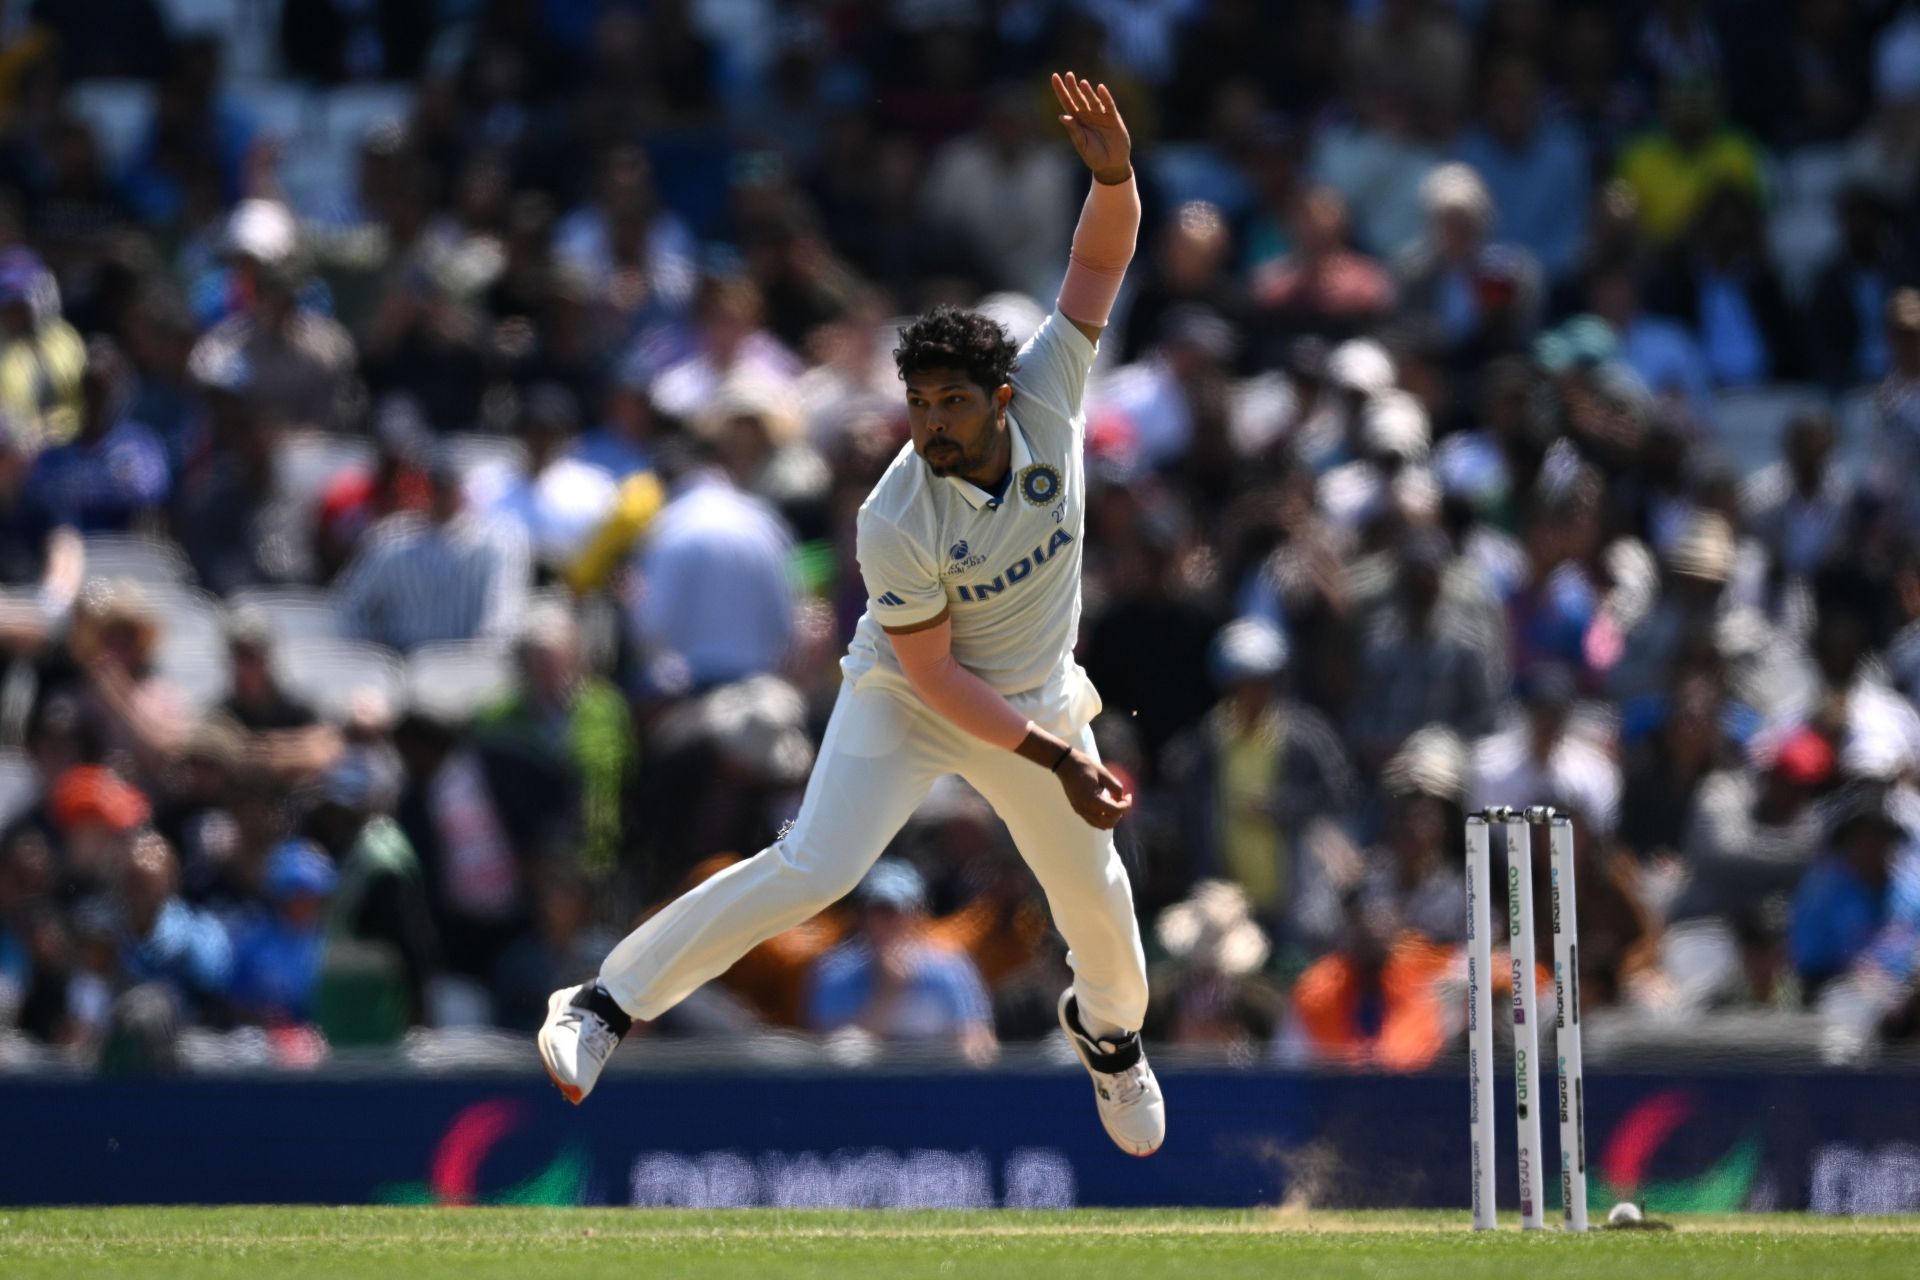 Umesh Yadav was poor in the first innings. (Pic: Getty Images)